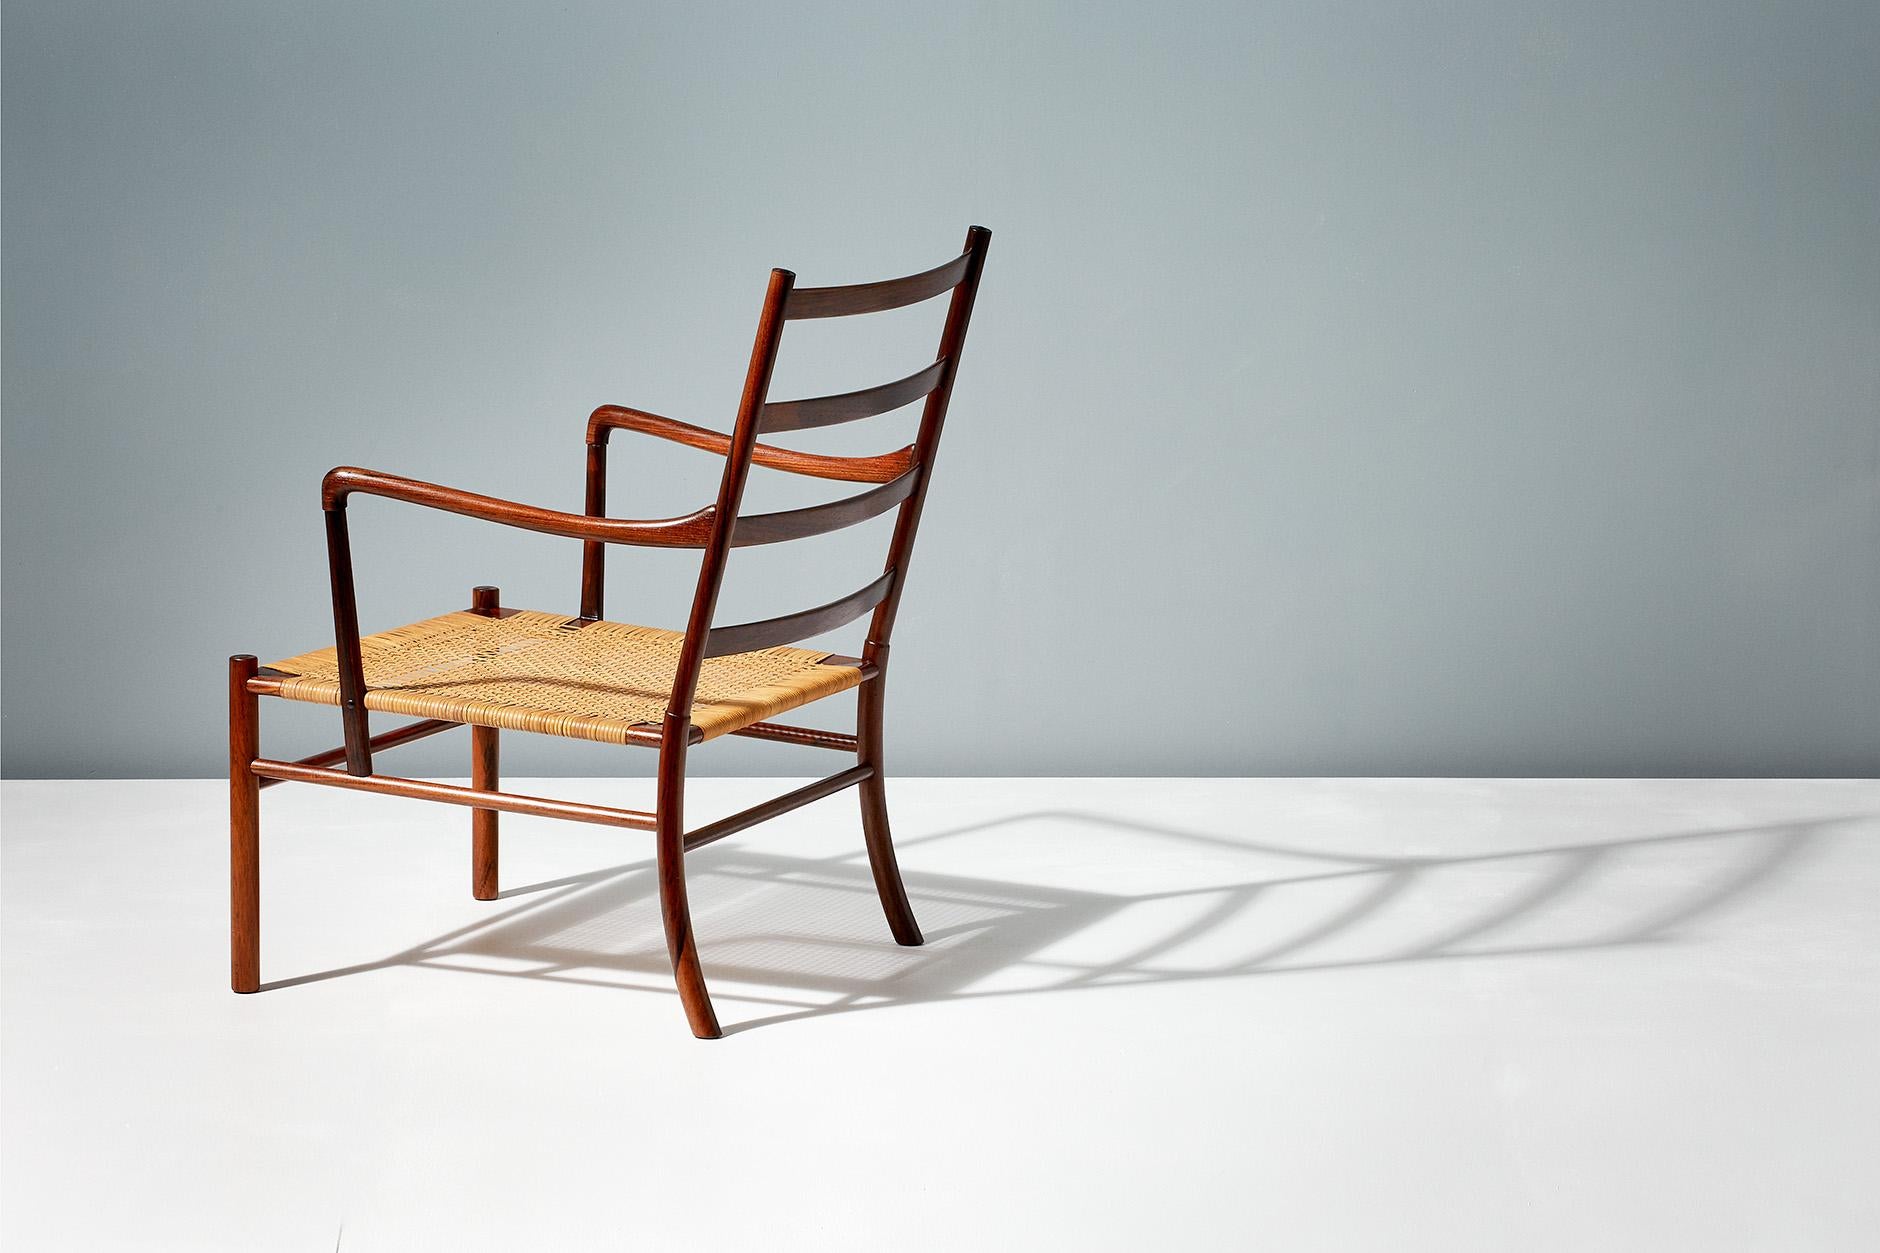 Ole Wanscher

PJ-149 colonial chair, 1949

The colonial chair is one of Wanscher’s best loved and most iconic designs, drawing influence from British and French Colonial furniture of the 18th-19th centuries. Produced by Poul Jeppesen, this